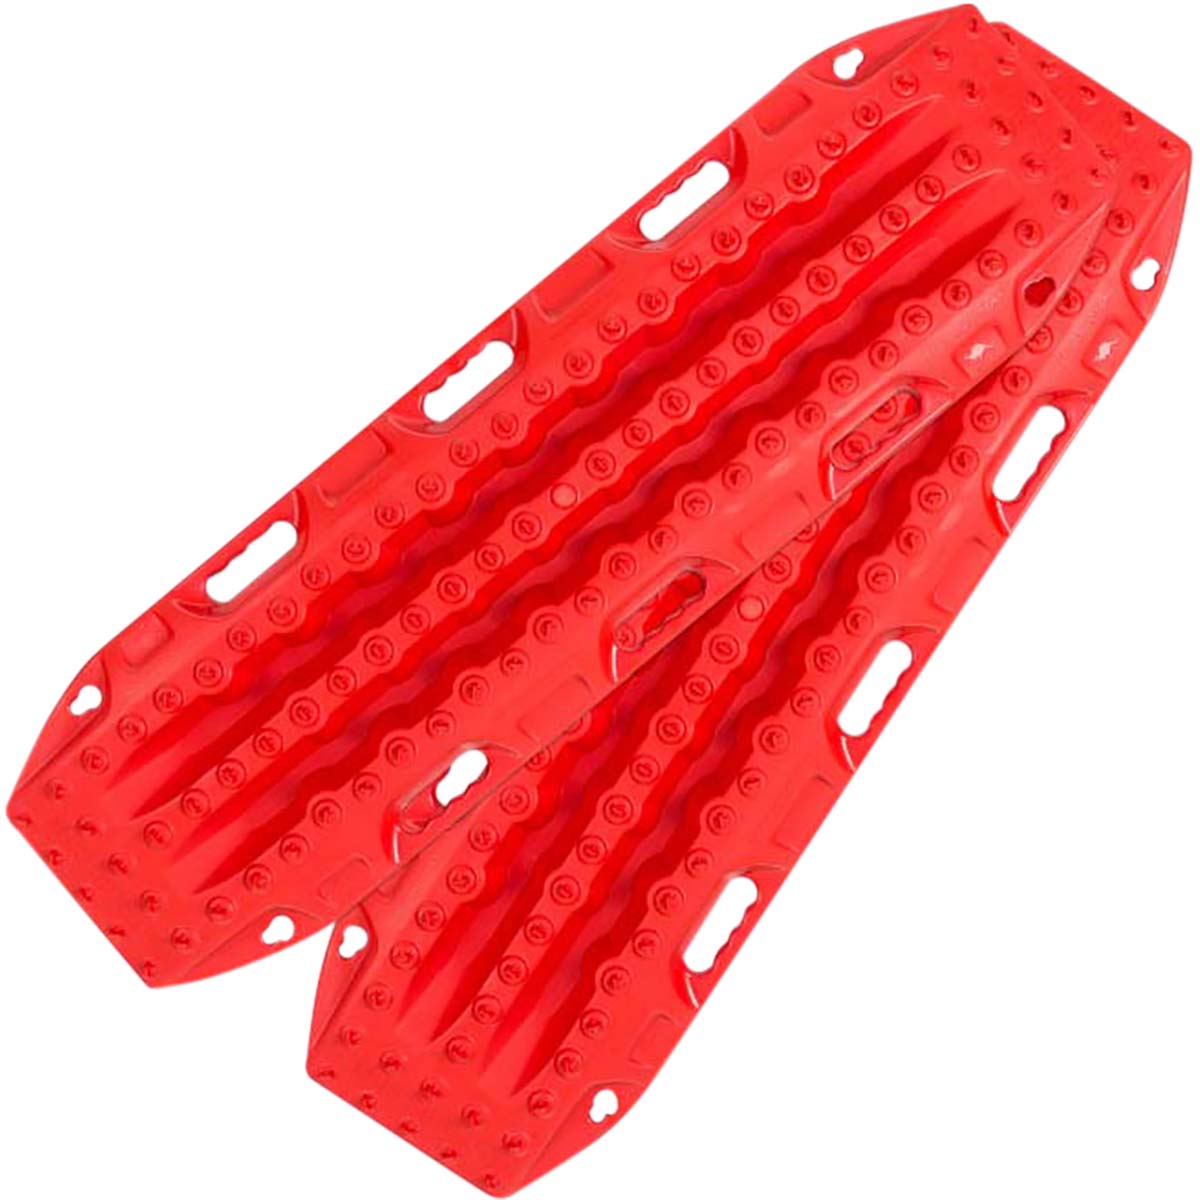 Maxtrax MKII Recovery Boards FJ Red